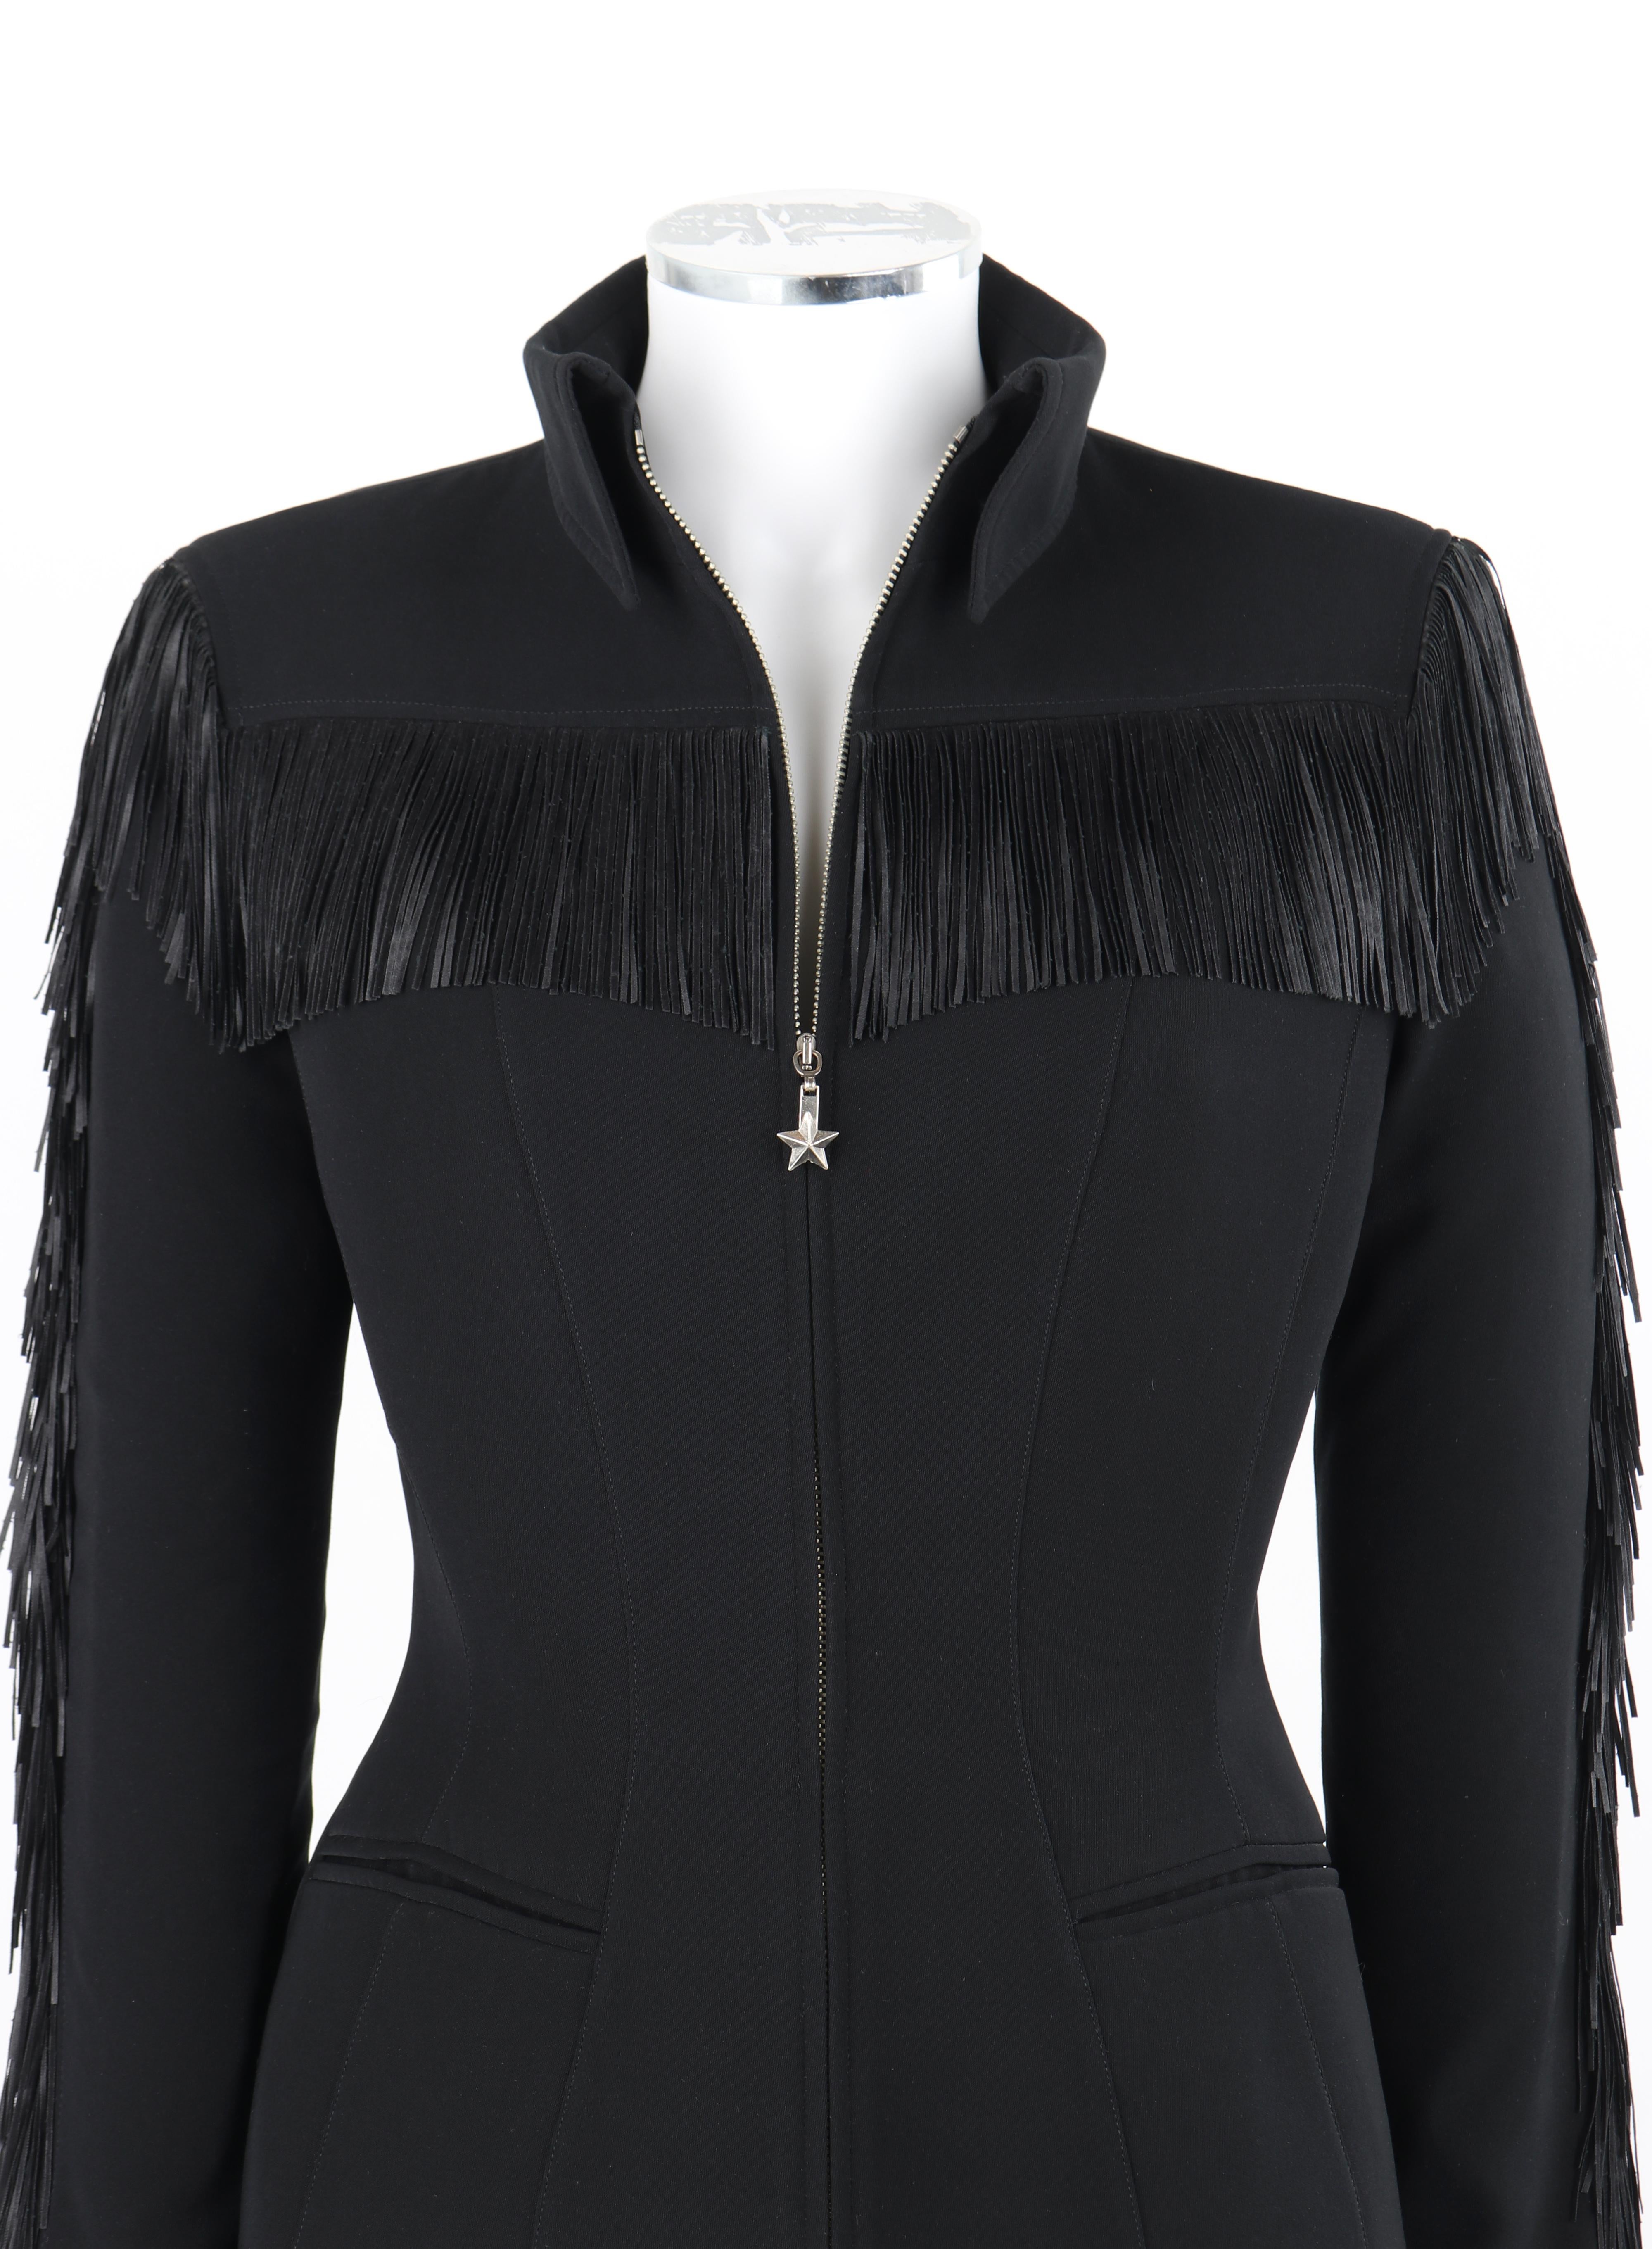 THIERRY MUGLER c.1990's Vtg Black Fringe High Collar Structured Zip Up Jacket  In Good Condition For Sale In Thiensville, WI